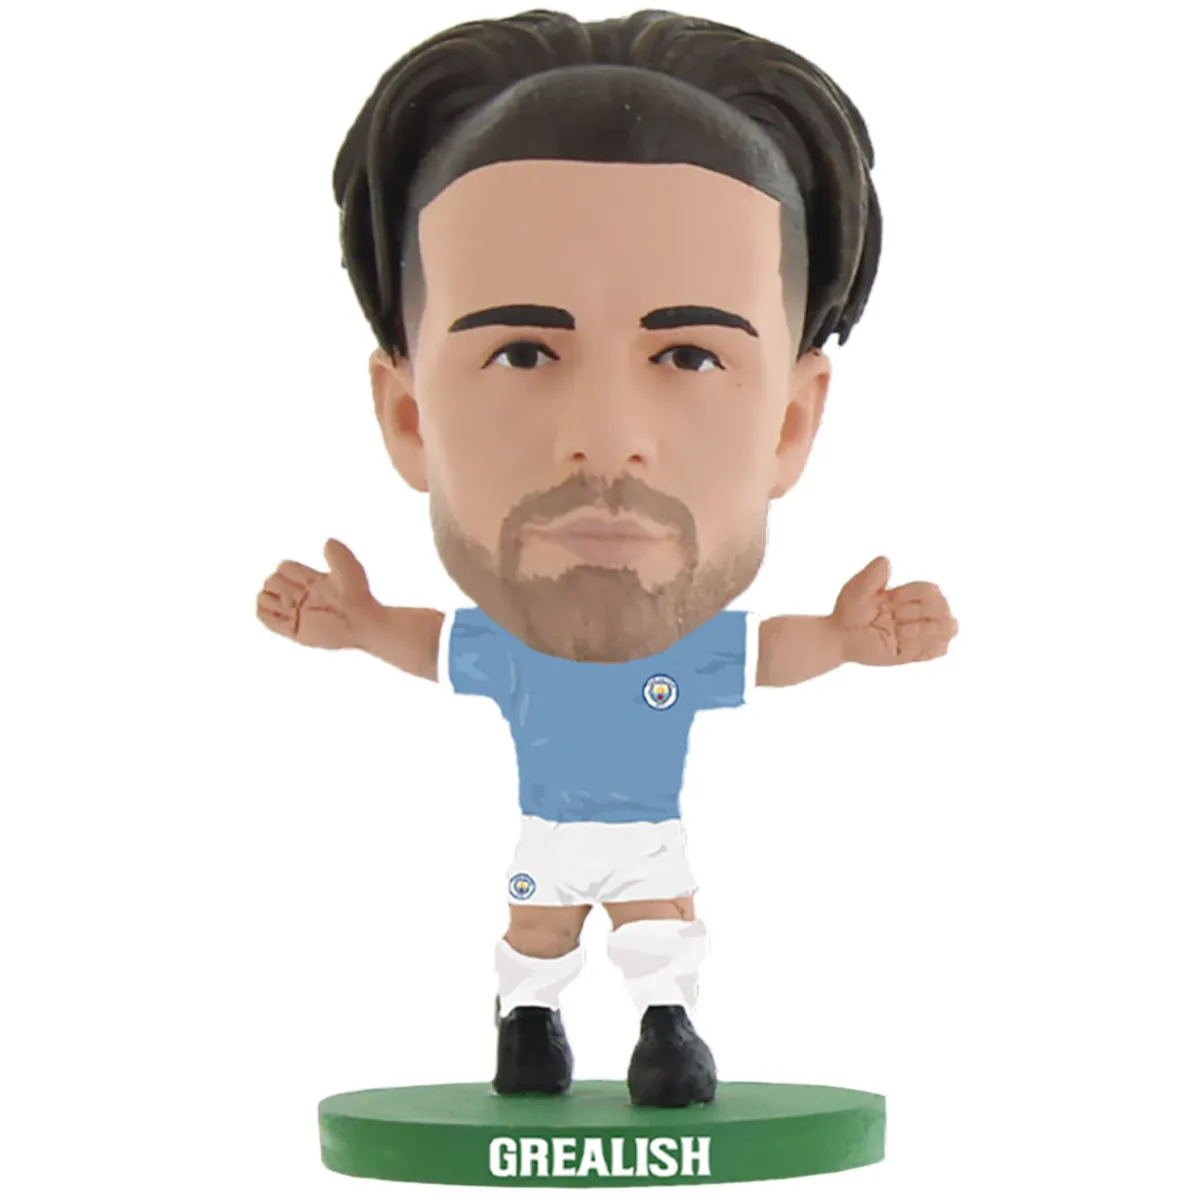 TM-00854 Manchester City FC SoccerStarz Collectable Figure - Jack Grealish